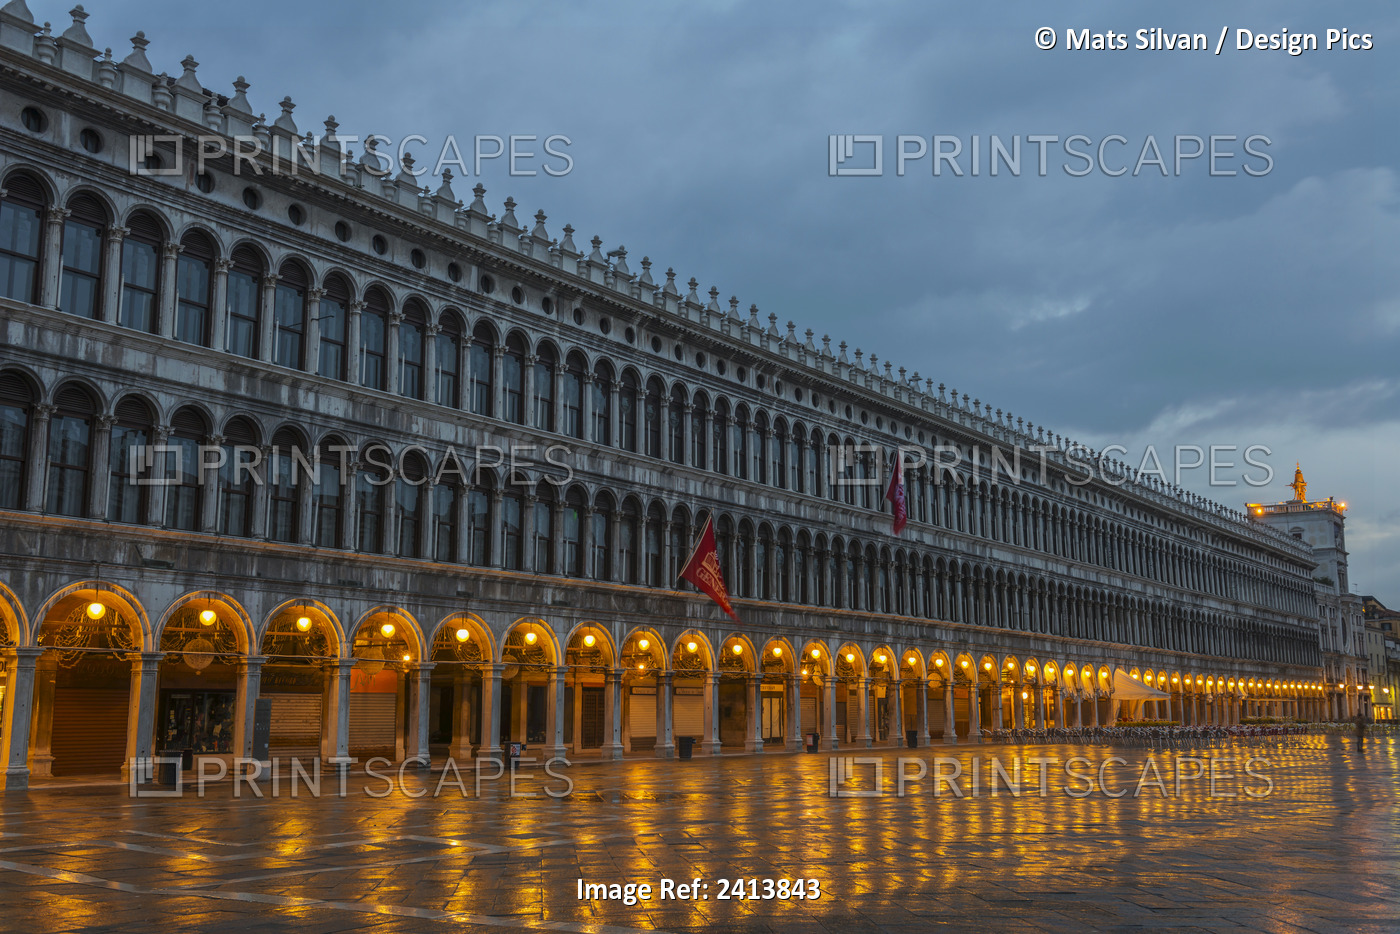 Lighted Archways In A Row Along A Building Reflected In The Wet Pavement, ...